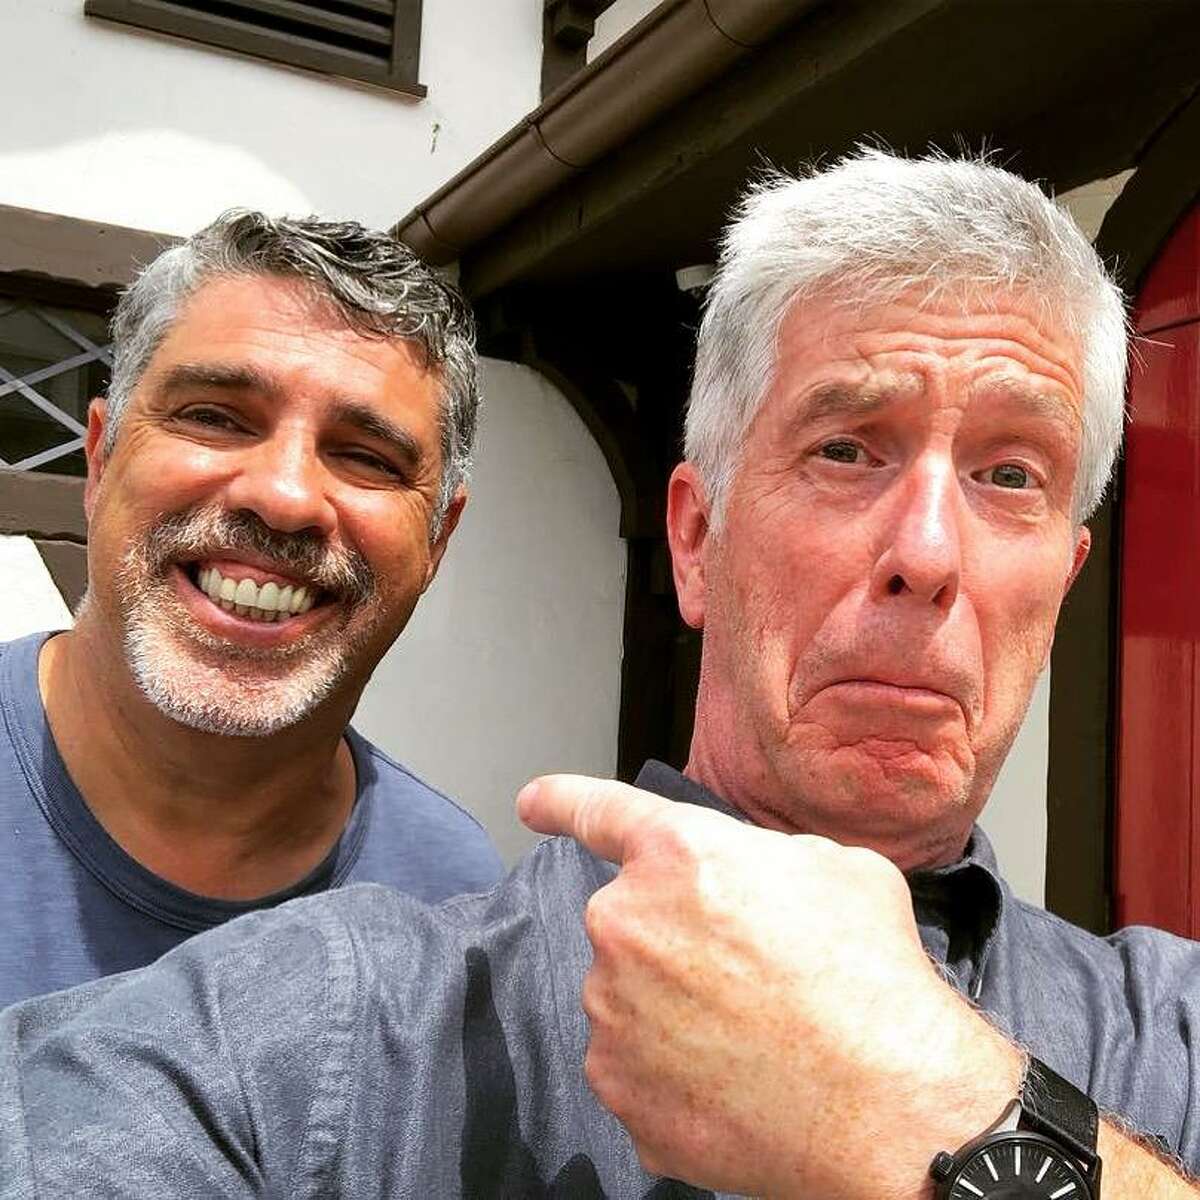 Howard Stern Show producer Gary Dell'Abate and "Dancing with the Stars" host Tom Bergeron having some fun at Little Pub in Cos Cob recently.